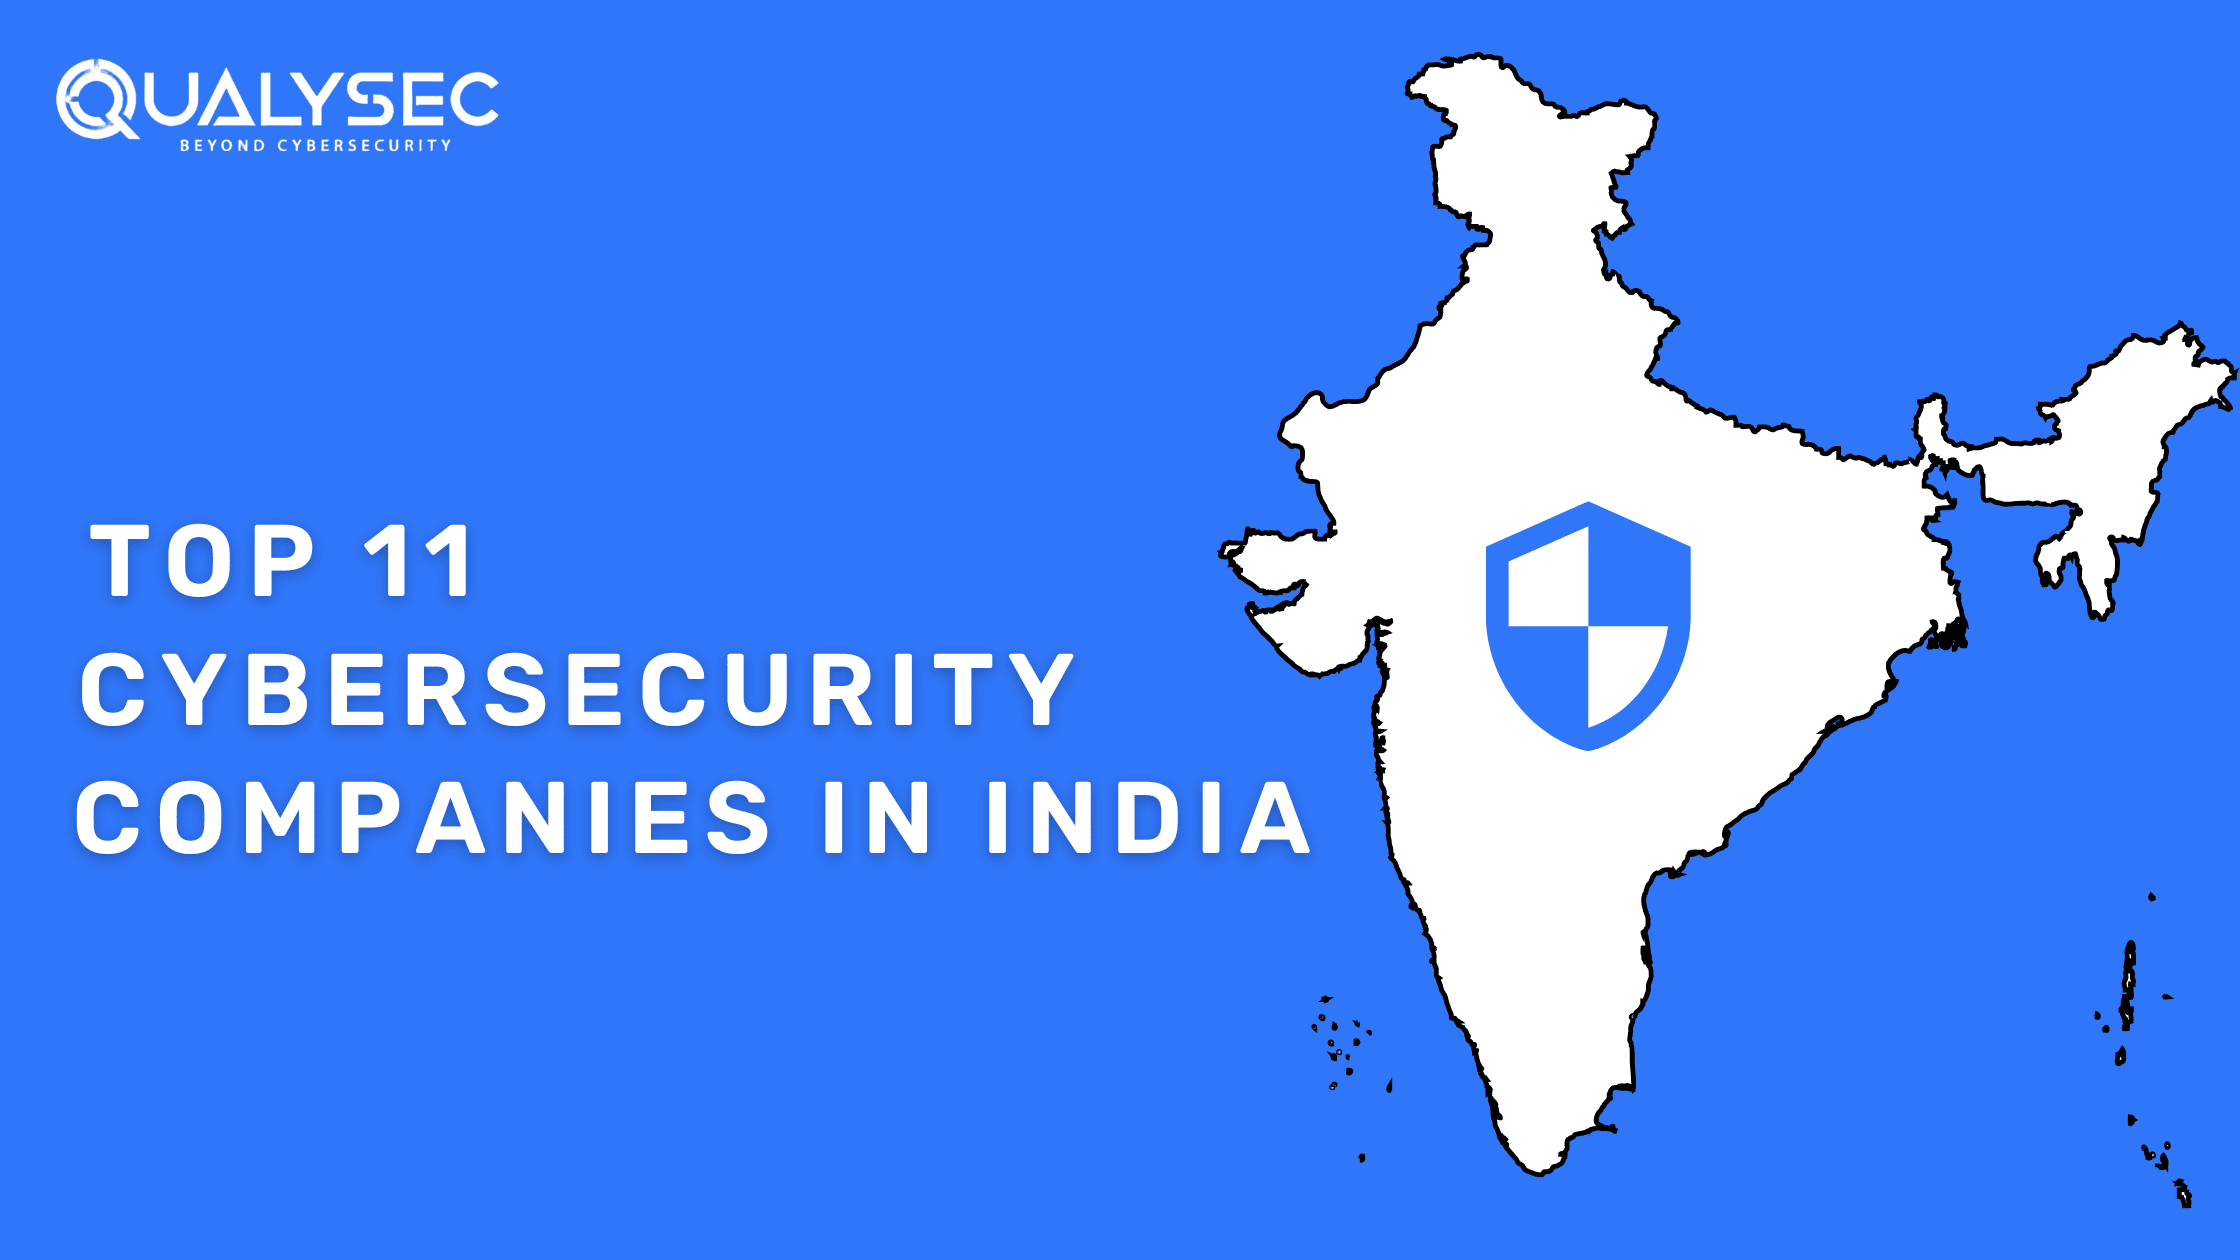 Top 11 Cybersecurity companies in India